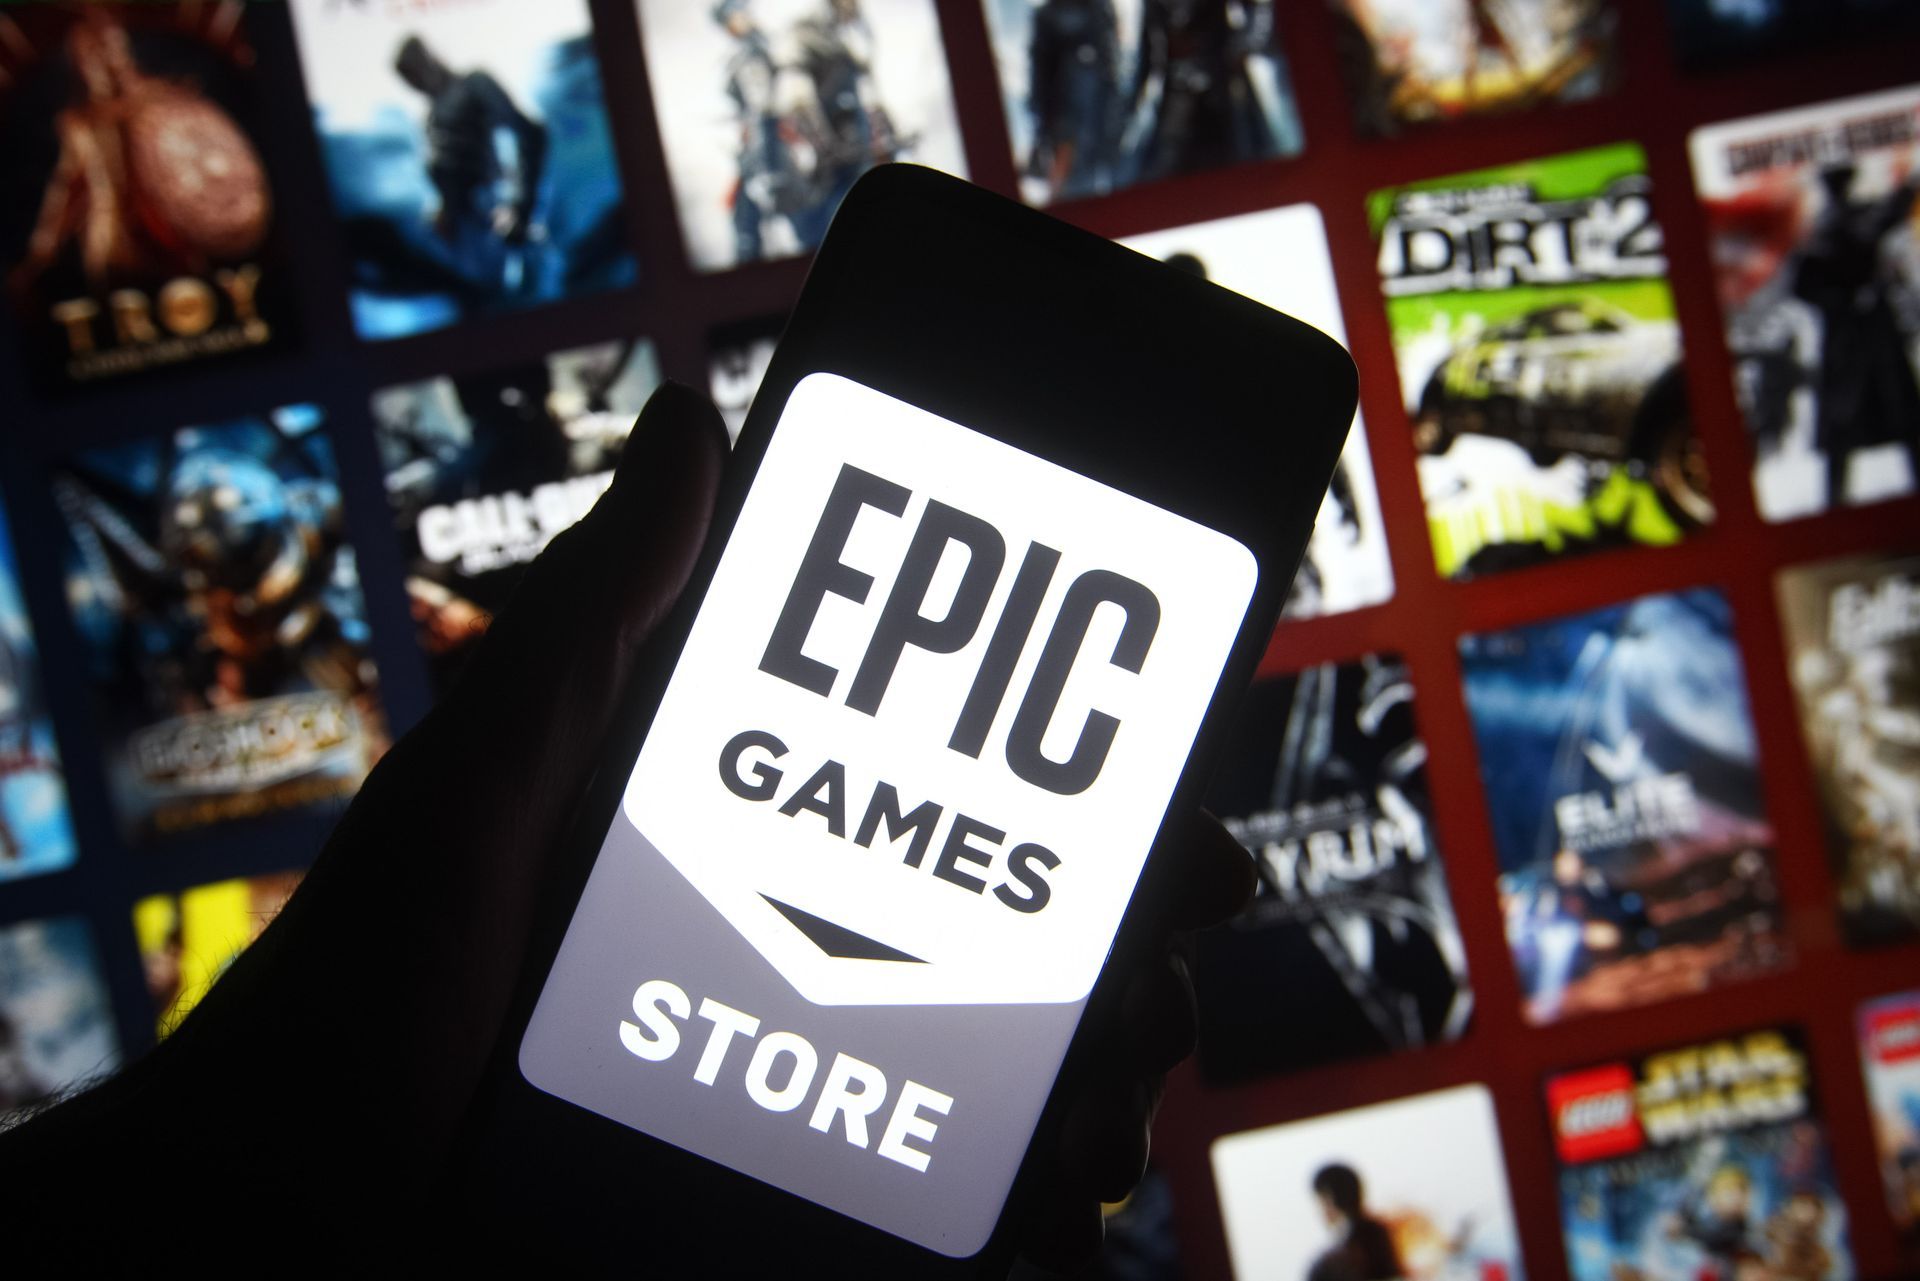 In this article, we are going to be covering how to fix Content Installation Failed Epic Games, so you can continue playing your favorite games without issues.